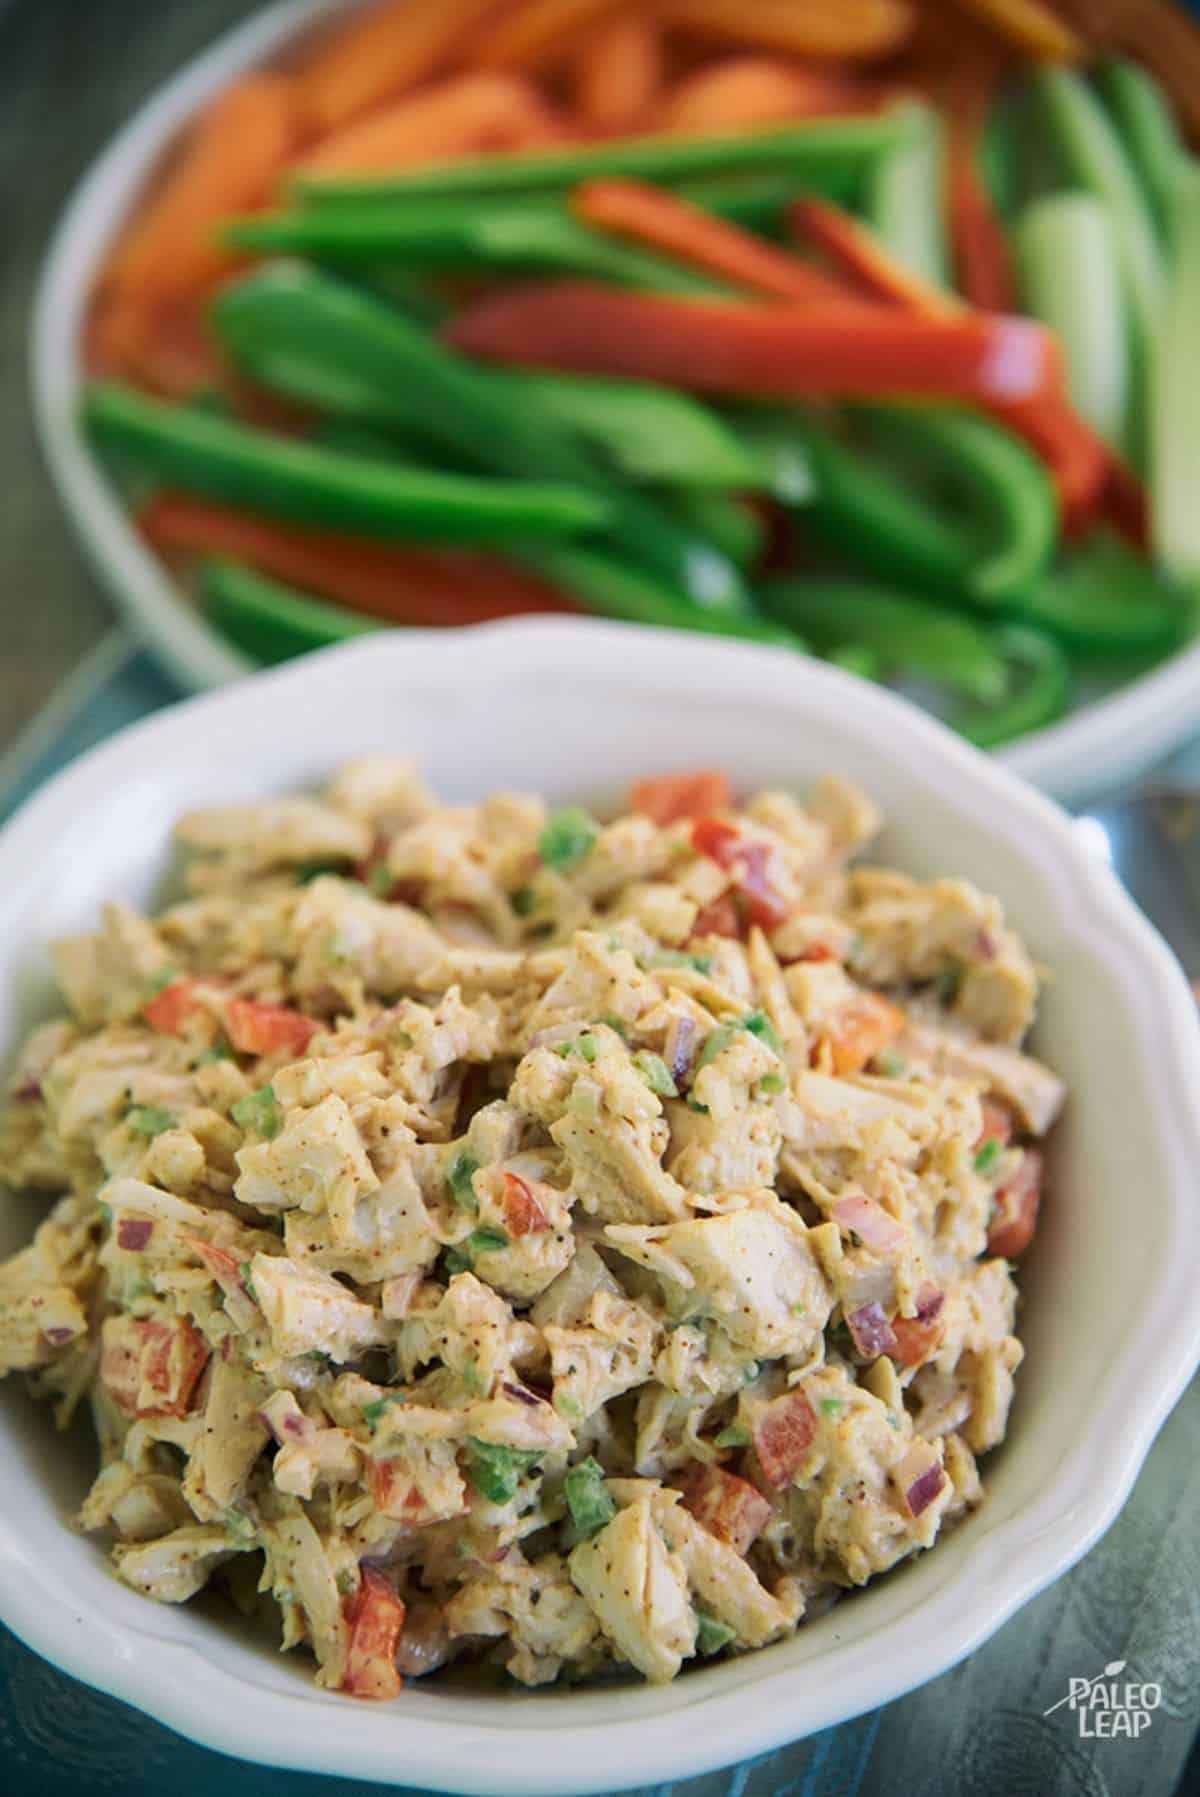 Spicy Mexican-Style Chicken Salad